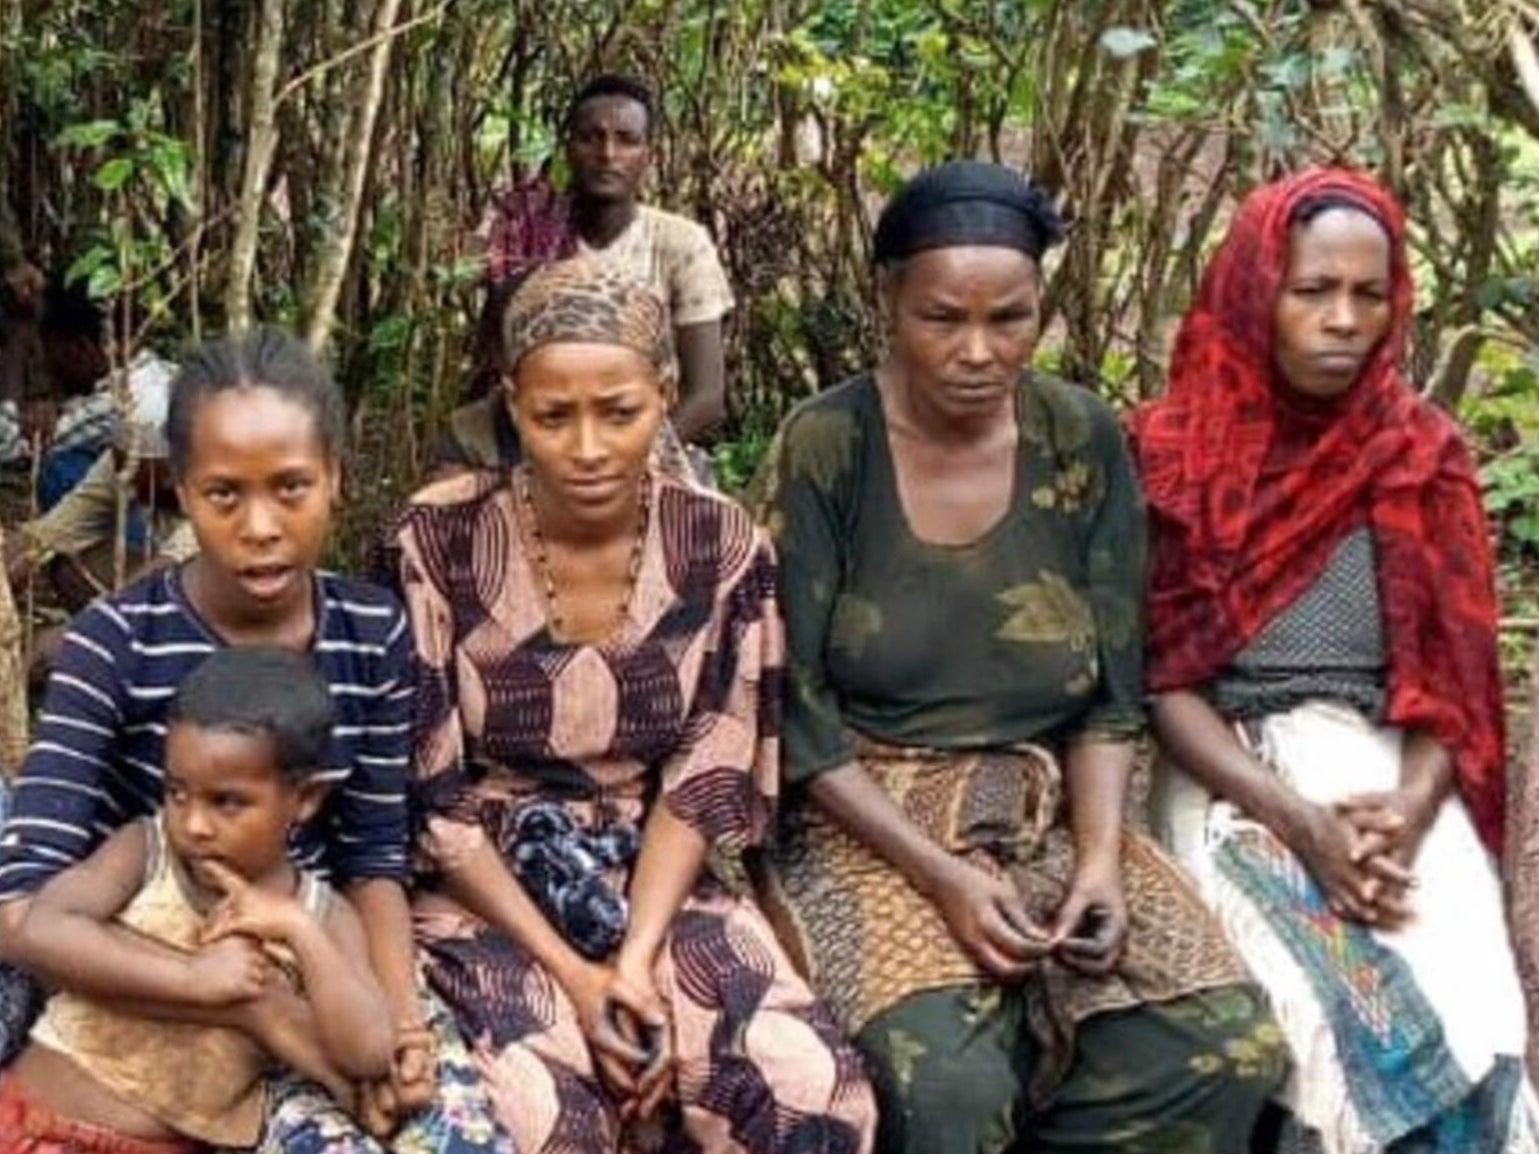 Survivors said that 54 people were killed in the village of Gawa Qanqa in Ethiopia on Sunday. 